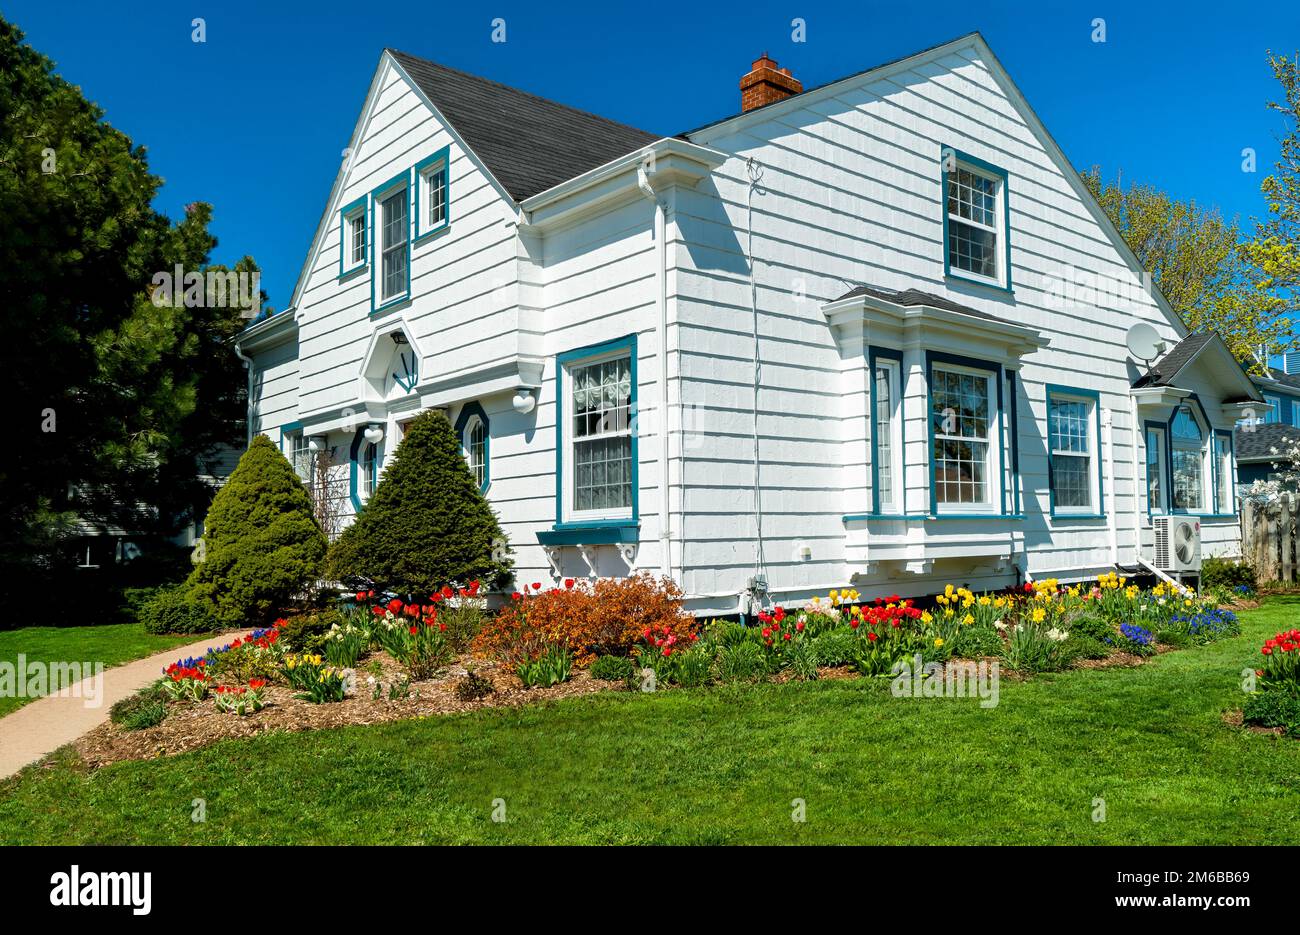 An older style tradional home with flower beds full of springtime flowers. Stock Photo